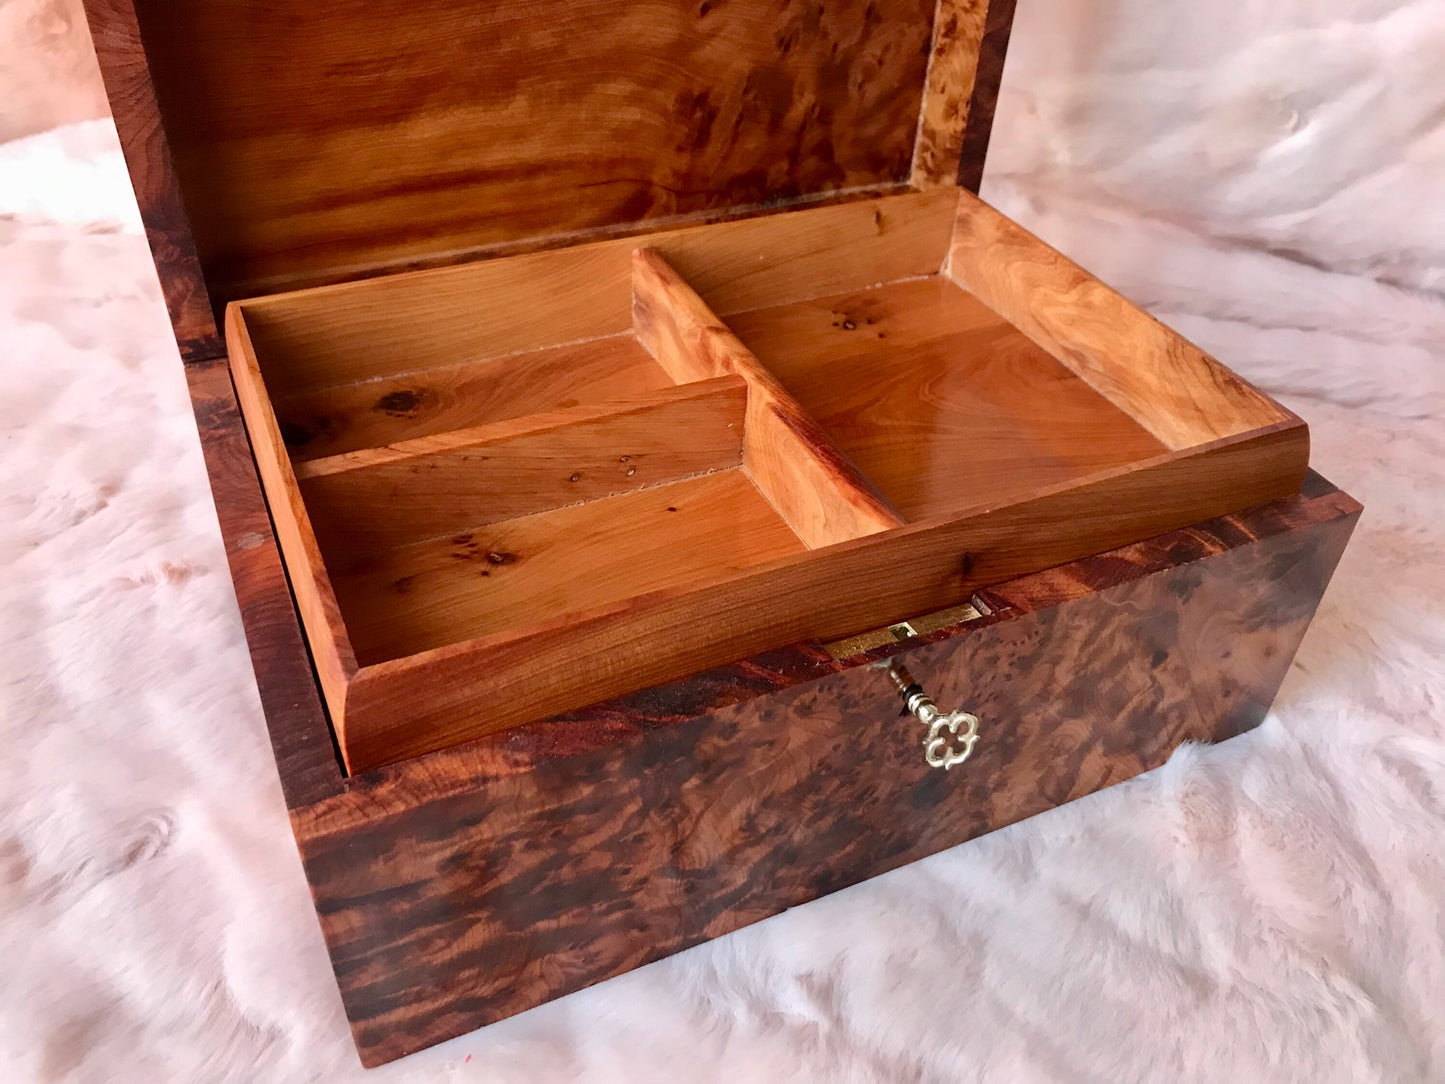 Moroccan lockable Thuya burl Jewelry wooden Box with key,inlaid with mother of pearl and black wood,Gift idea,wife,girl,mother anniversary